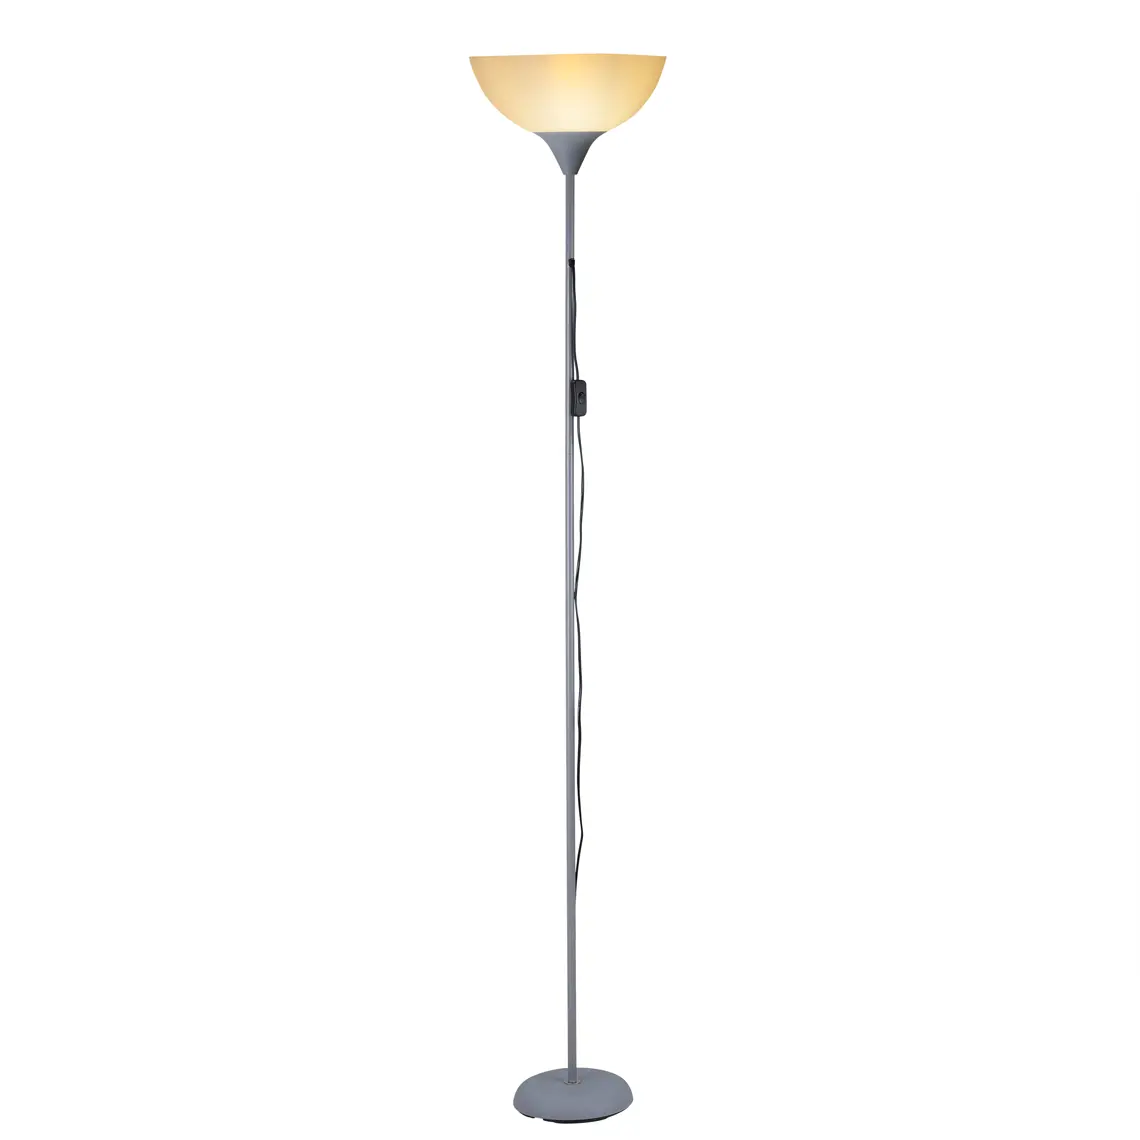 2021 Best seller Floor Lamp E27 max 40W with grey color Home customize floor lamp